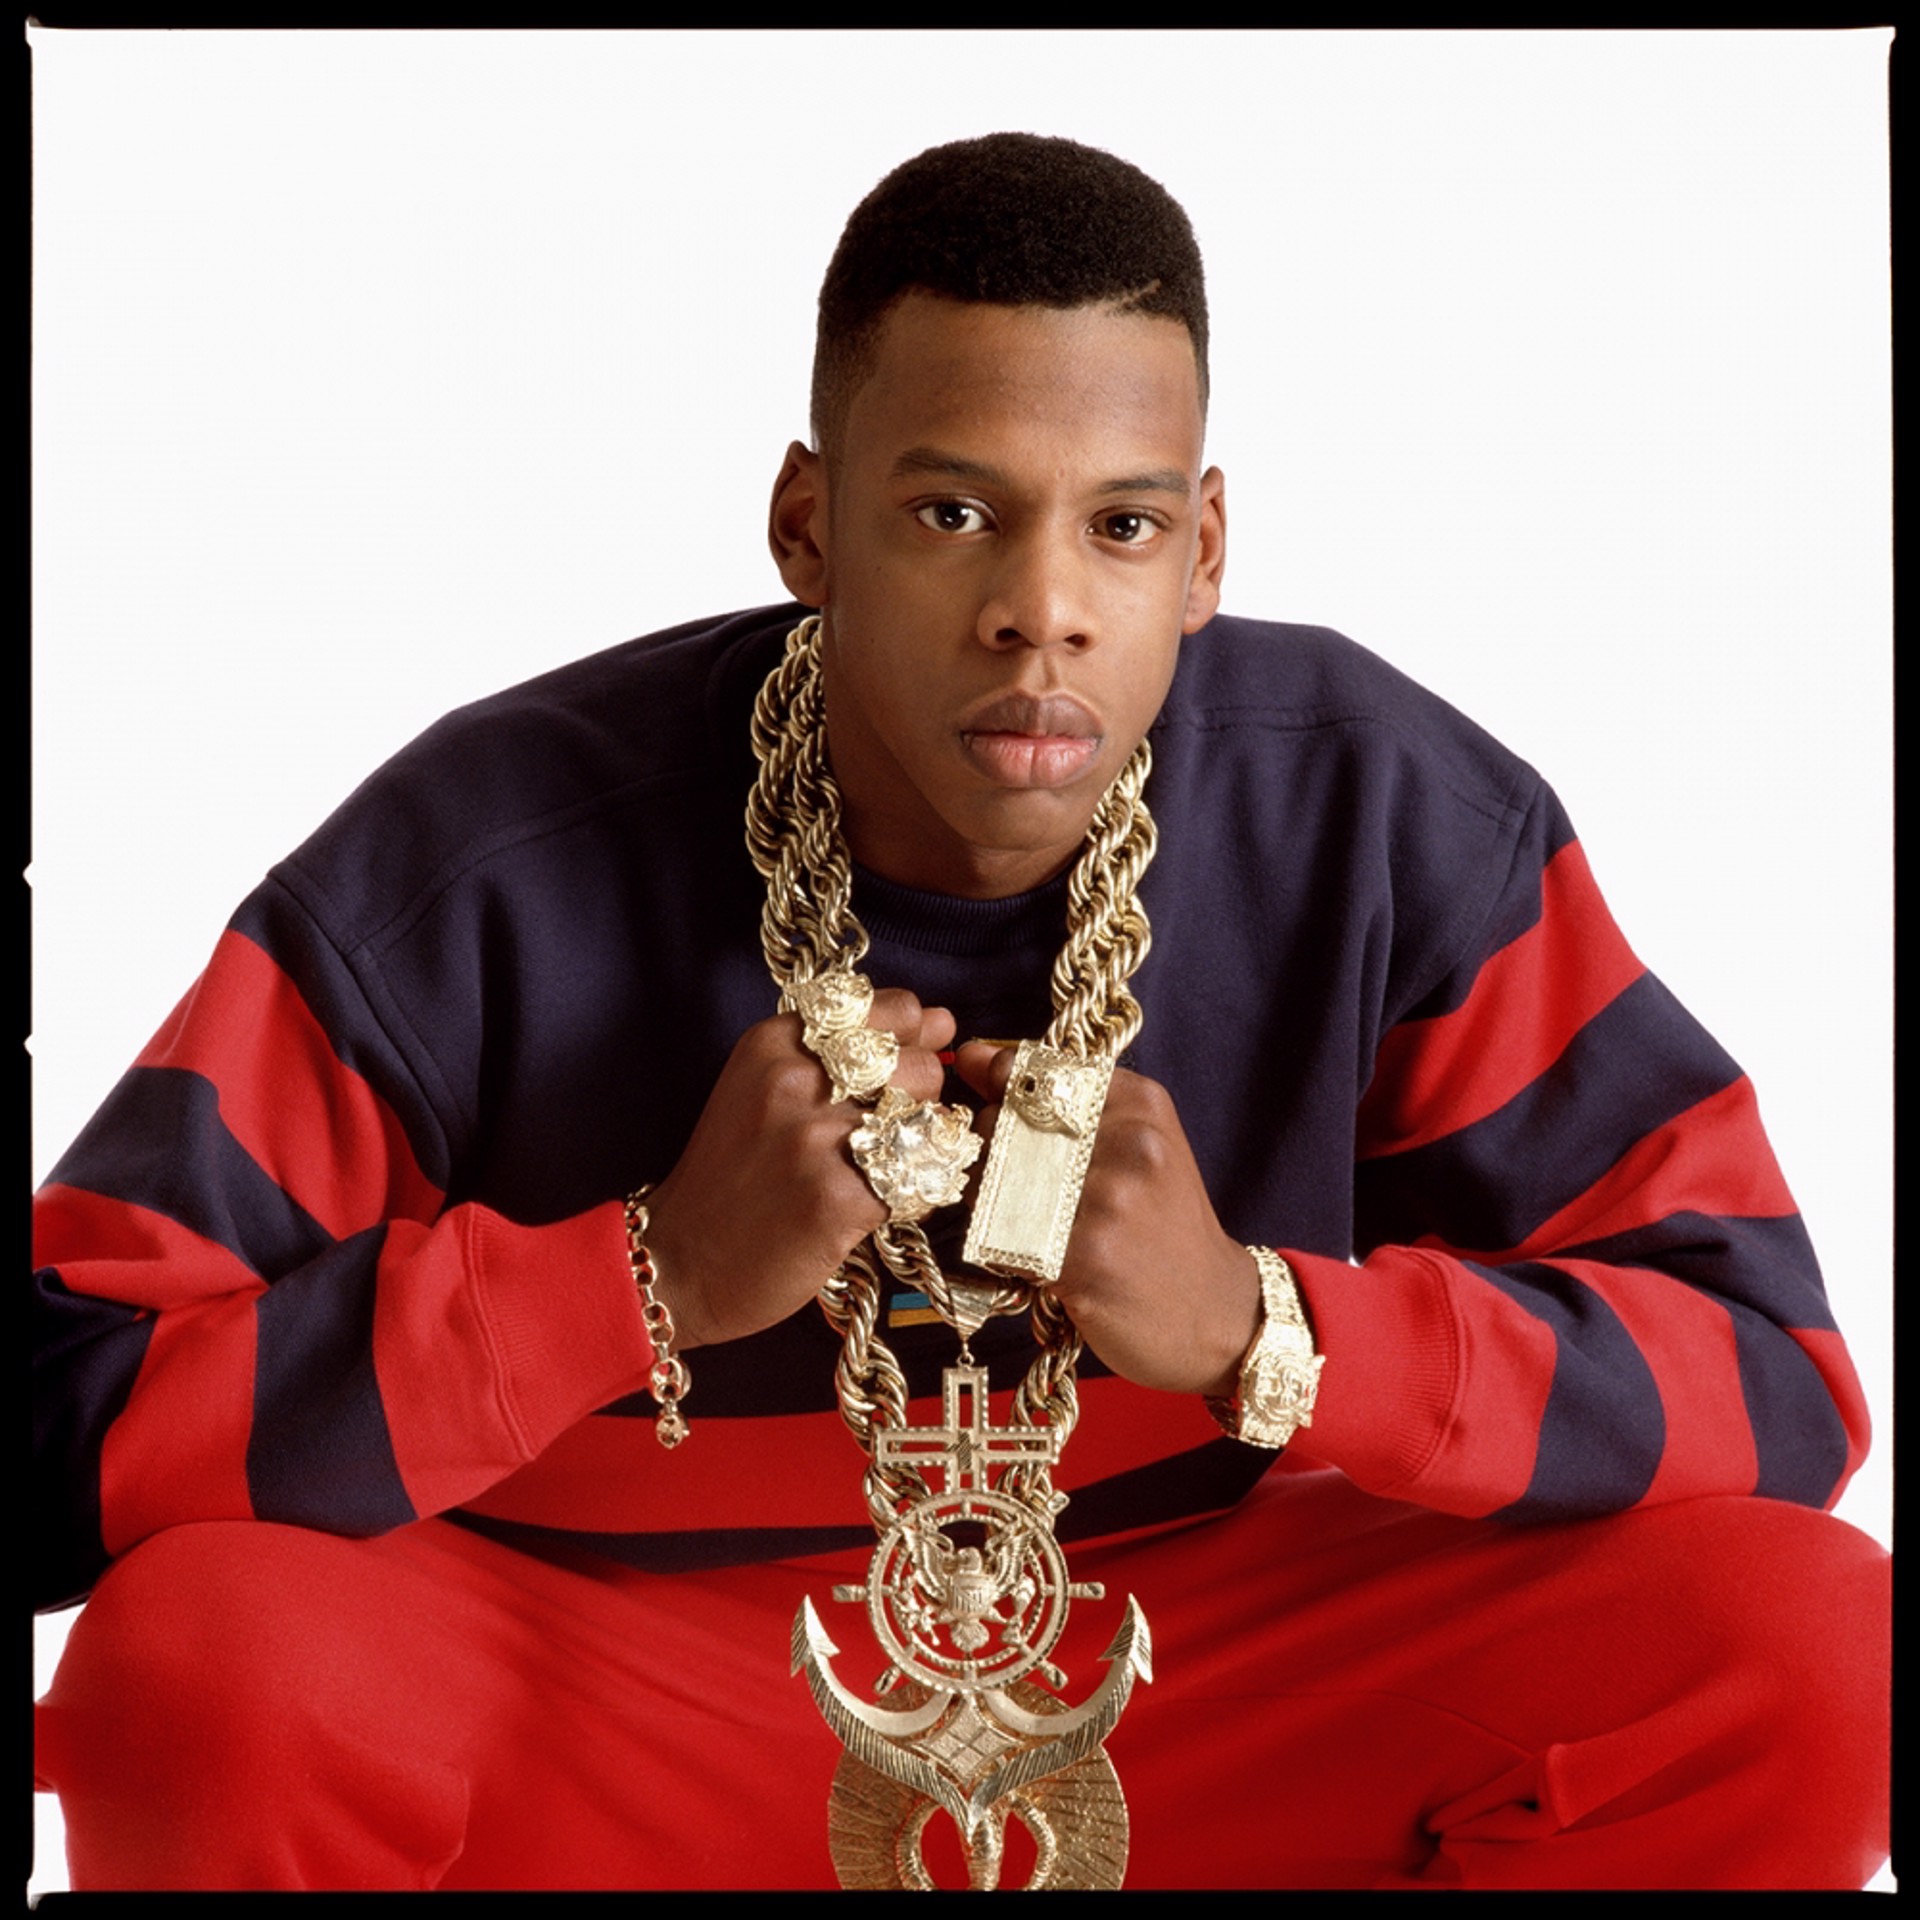 88217 Jay Z Red Sweater 1988 Color by Timothy White